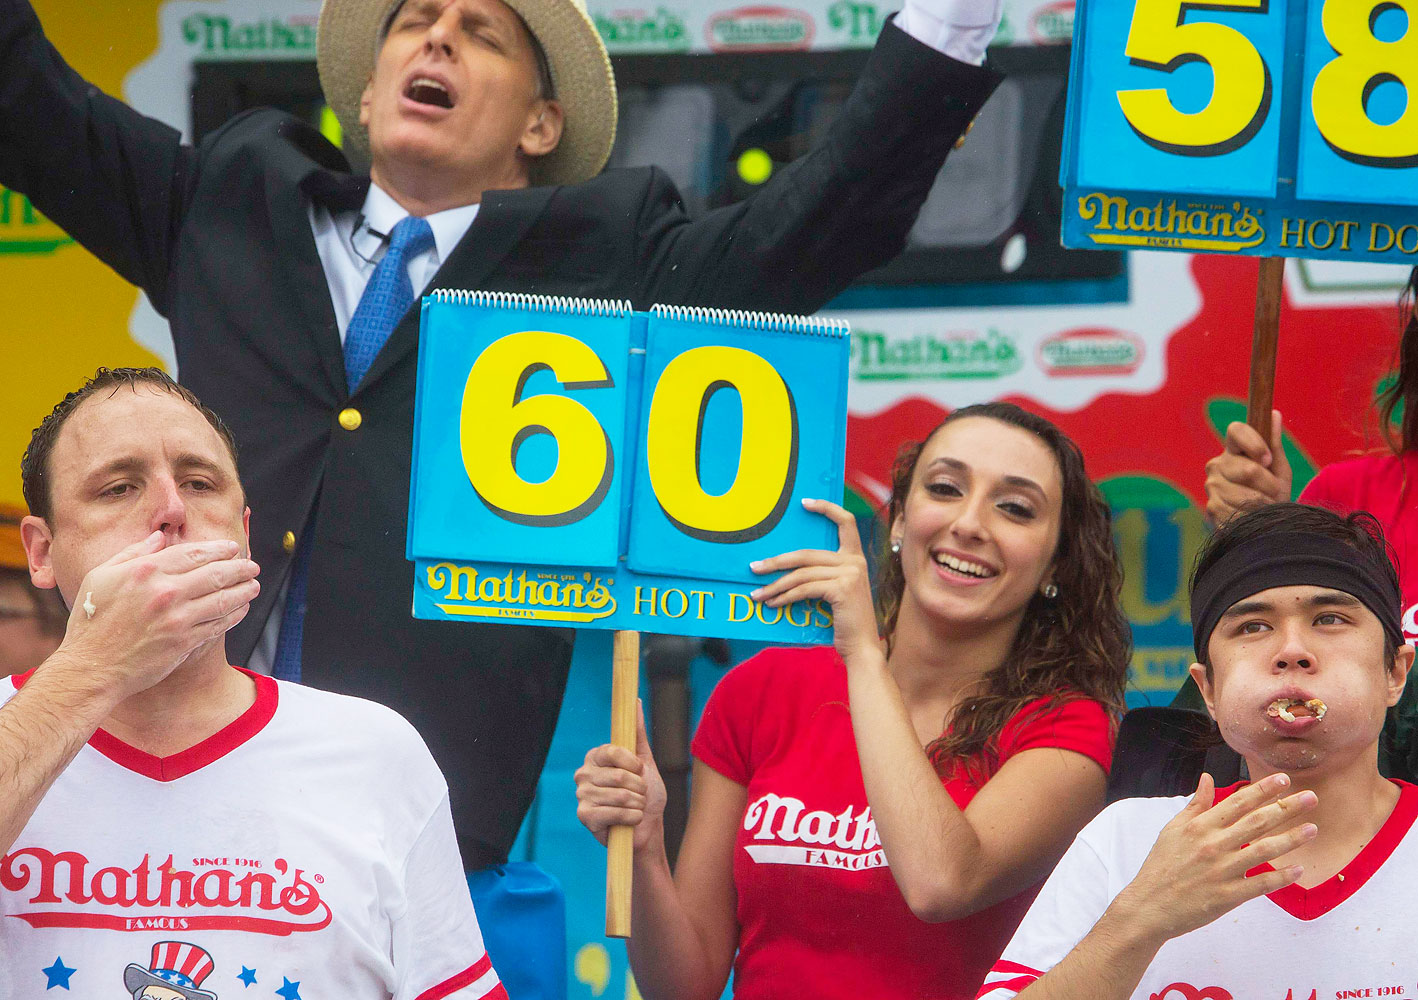 Joey Chestnut, left, and Matt Stonie, right, at the final moments of the annual Nathan's Famous Fourth of July International Hot Dog-Eating Contest at Coney Island.